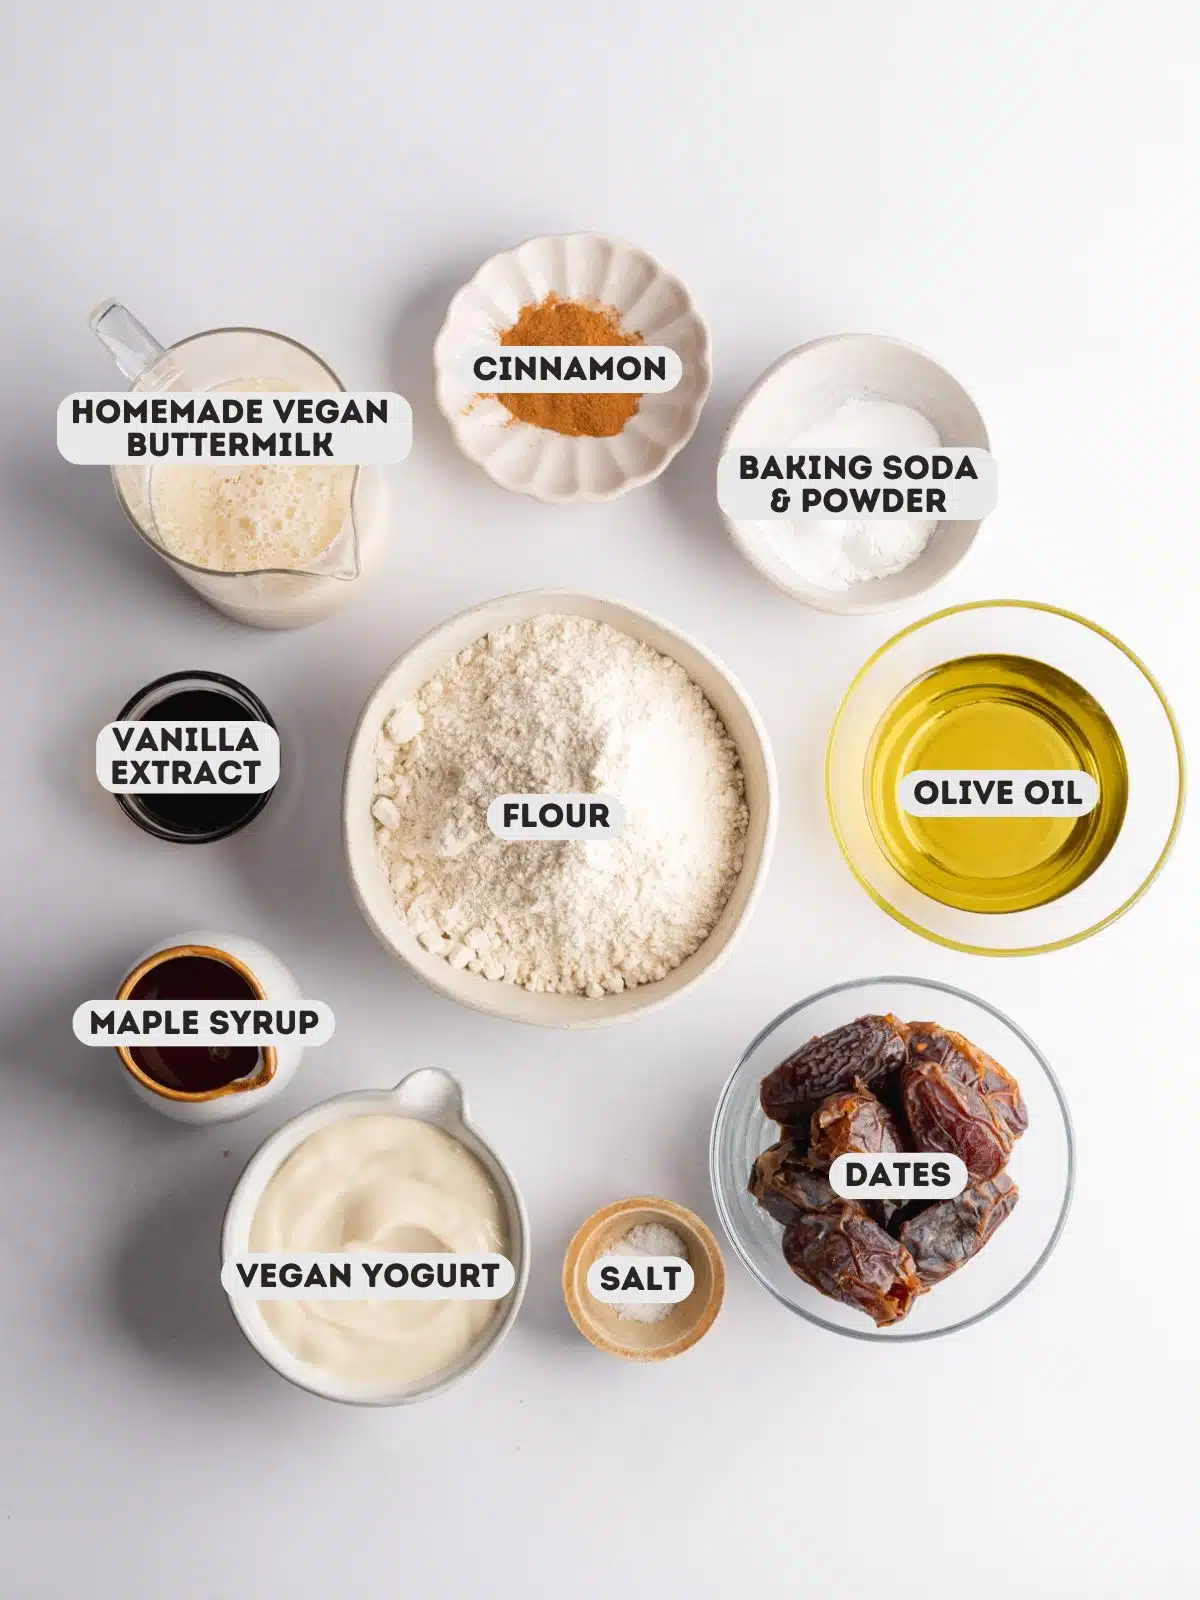 ingredients to make date muffins measured out in bowls on a gray surface with text overlay.